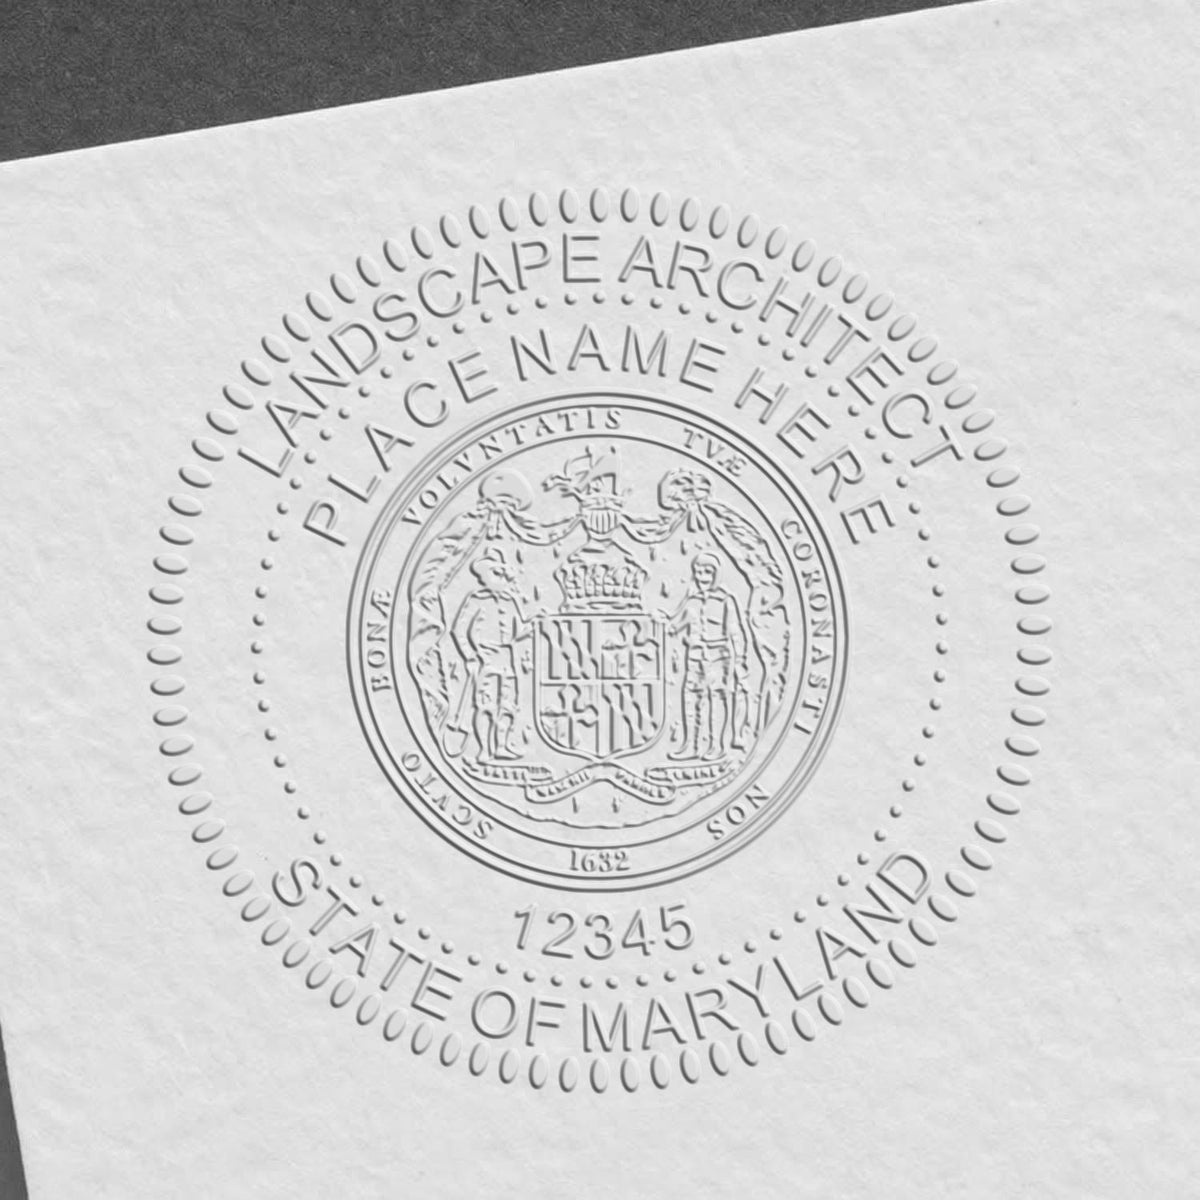 An in use photo of the Hybrid Maryland Landscape Architect Seal showing a sample imprint on a cardstock